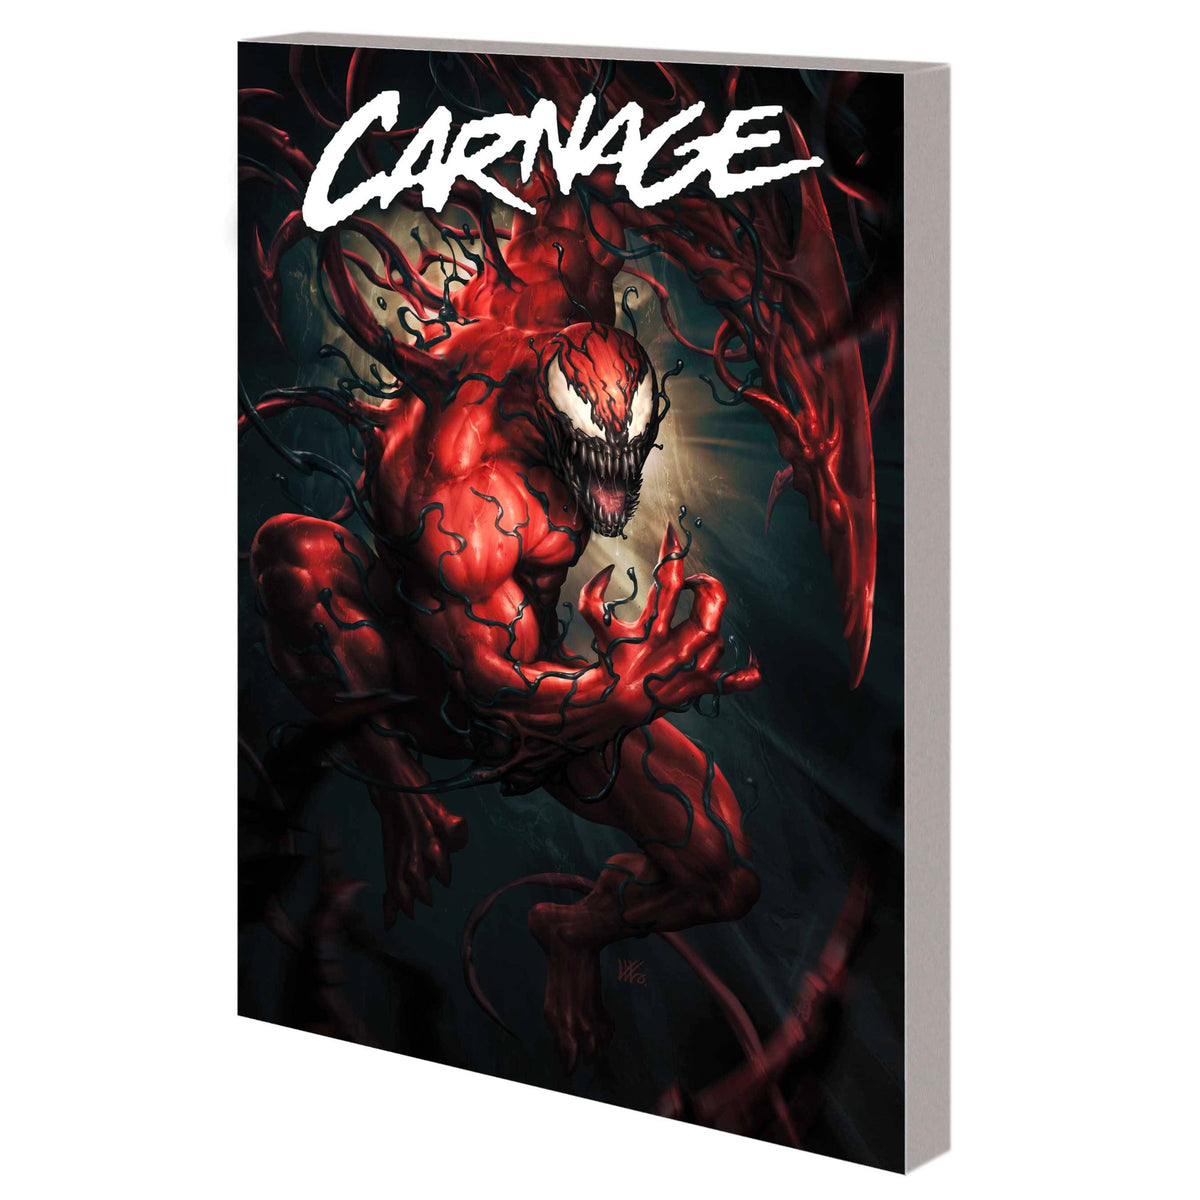 Carnage Trade Paperback Volume 1 In the Court of Crimson FINALSALE